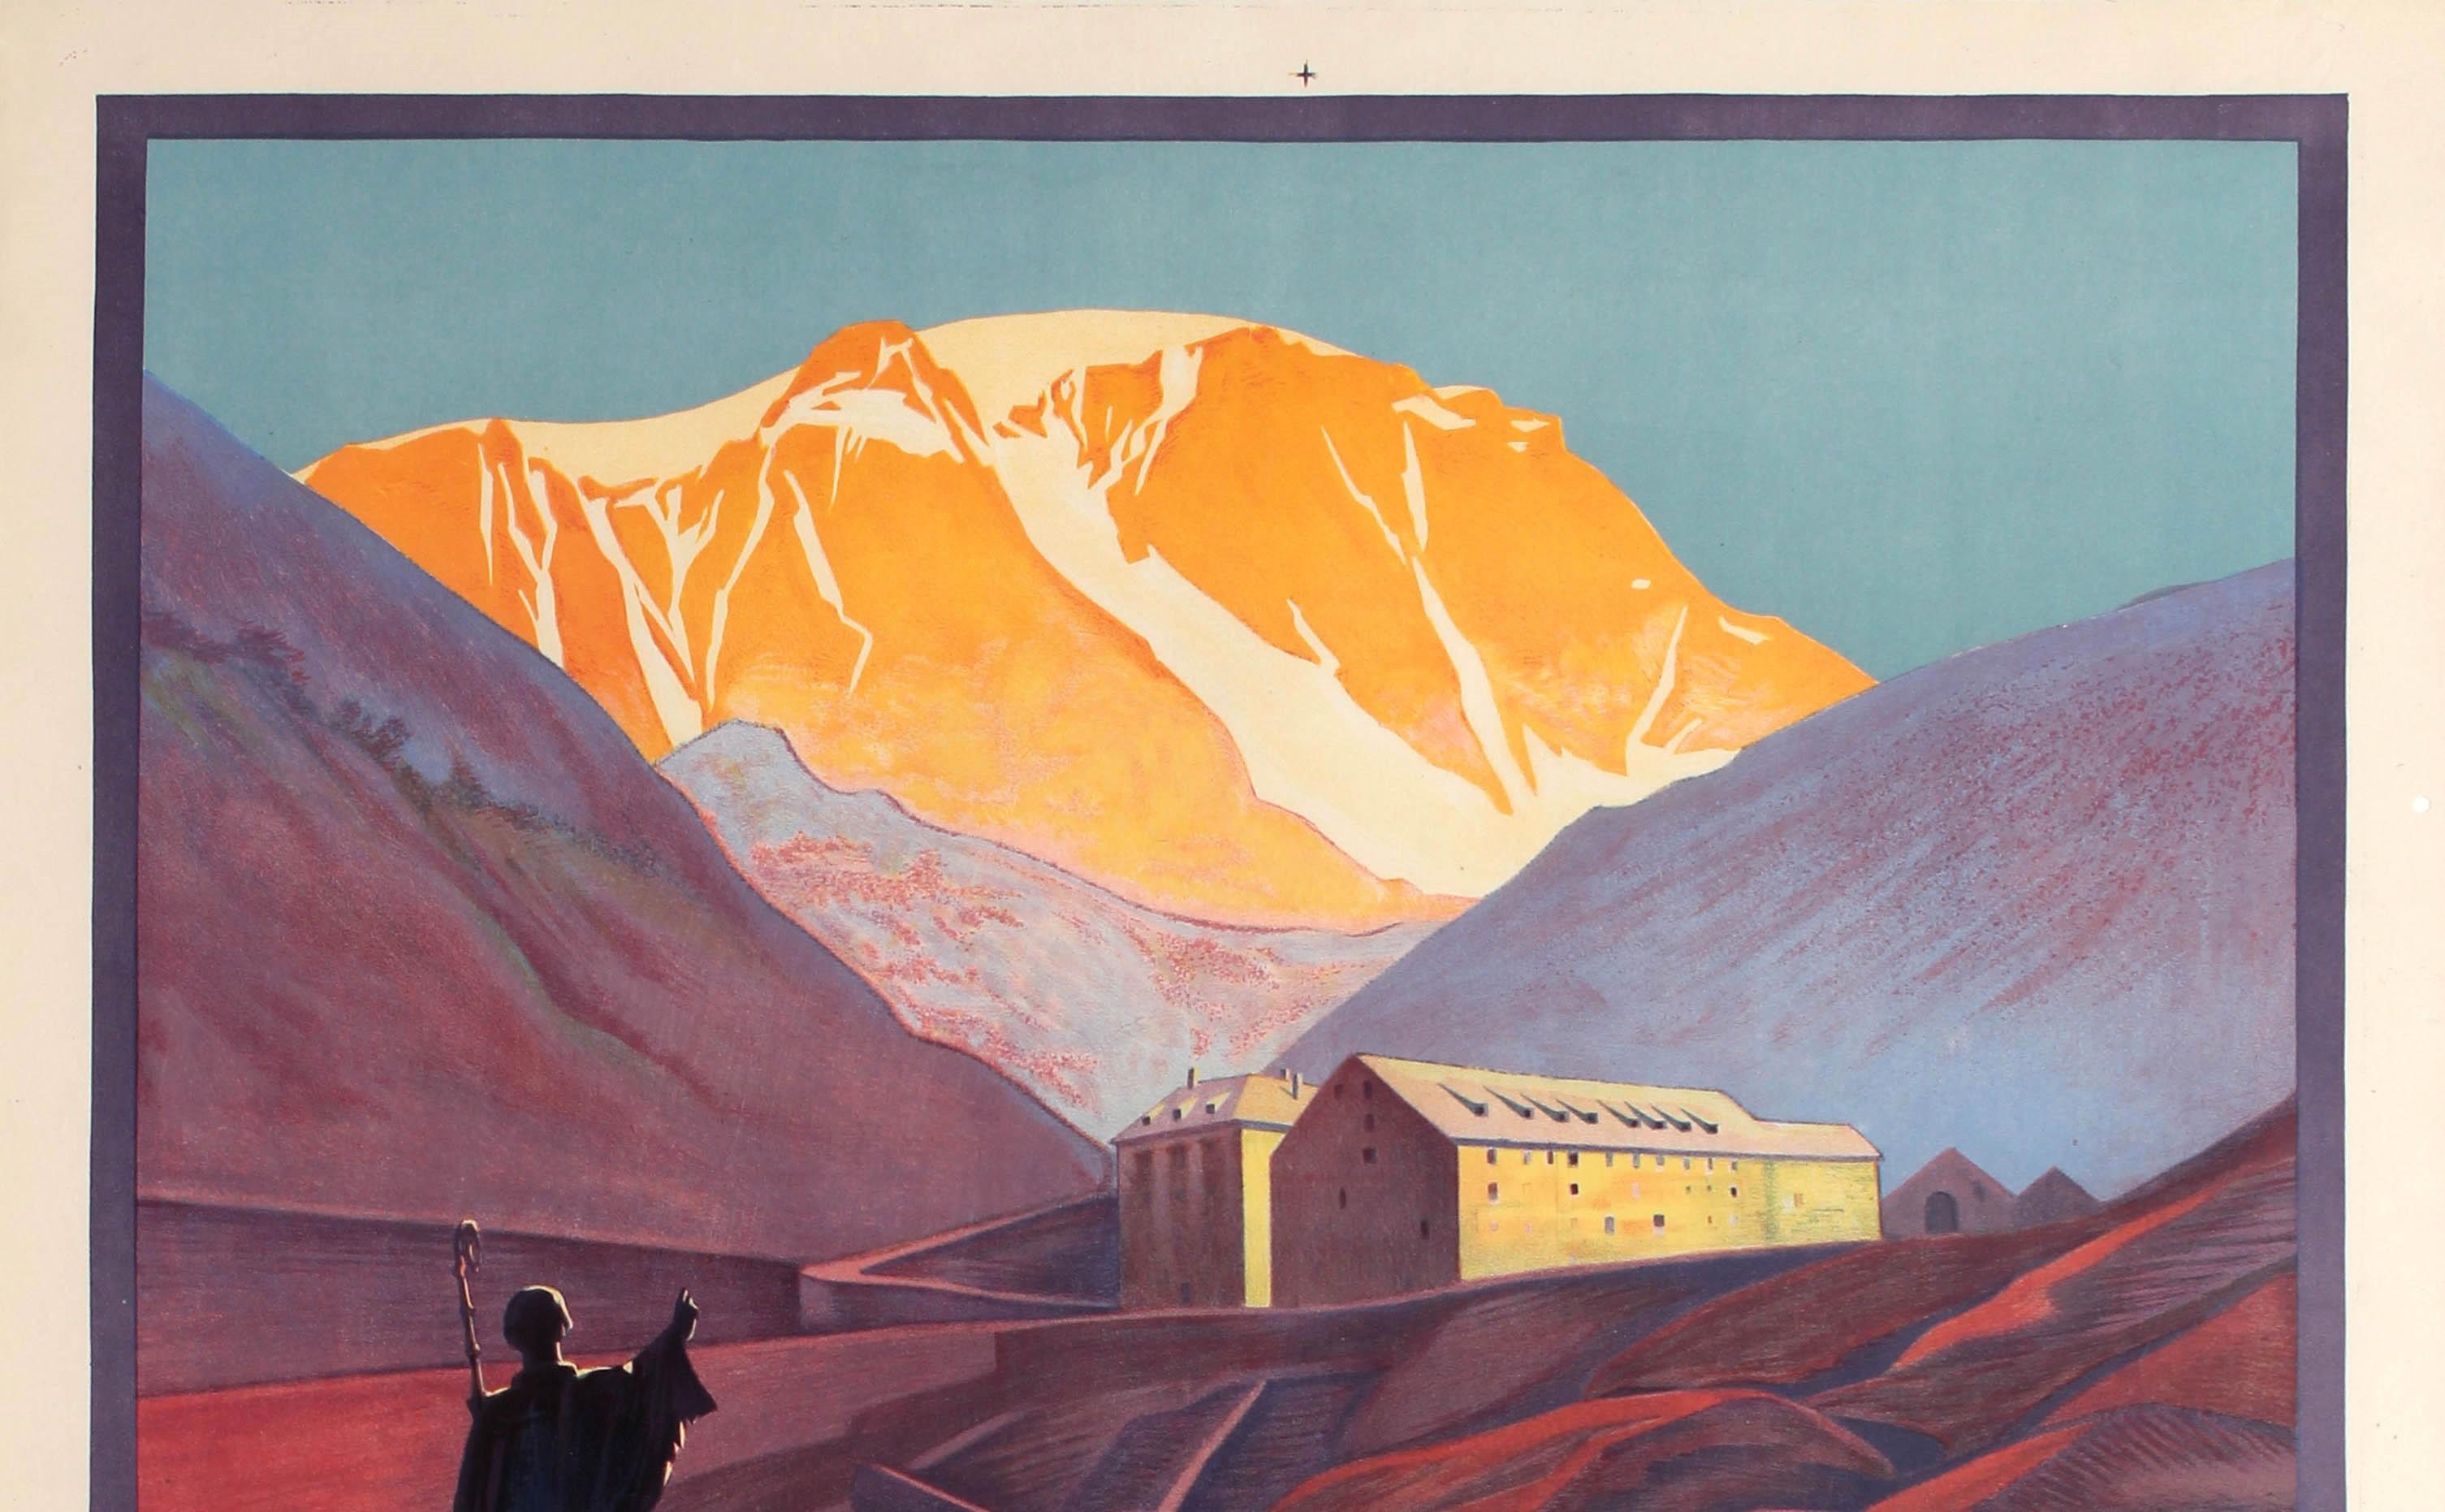 Original vintage PLM travel poster for the historic Col Du Grand St Bernard / Great St. Bernard Pass lying between Mont Blanc and Monte Rosa in the Alps connecting Martigny in Valais Switzerland with Aosta in Italy (a route used since the Bronze